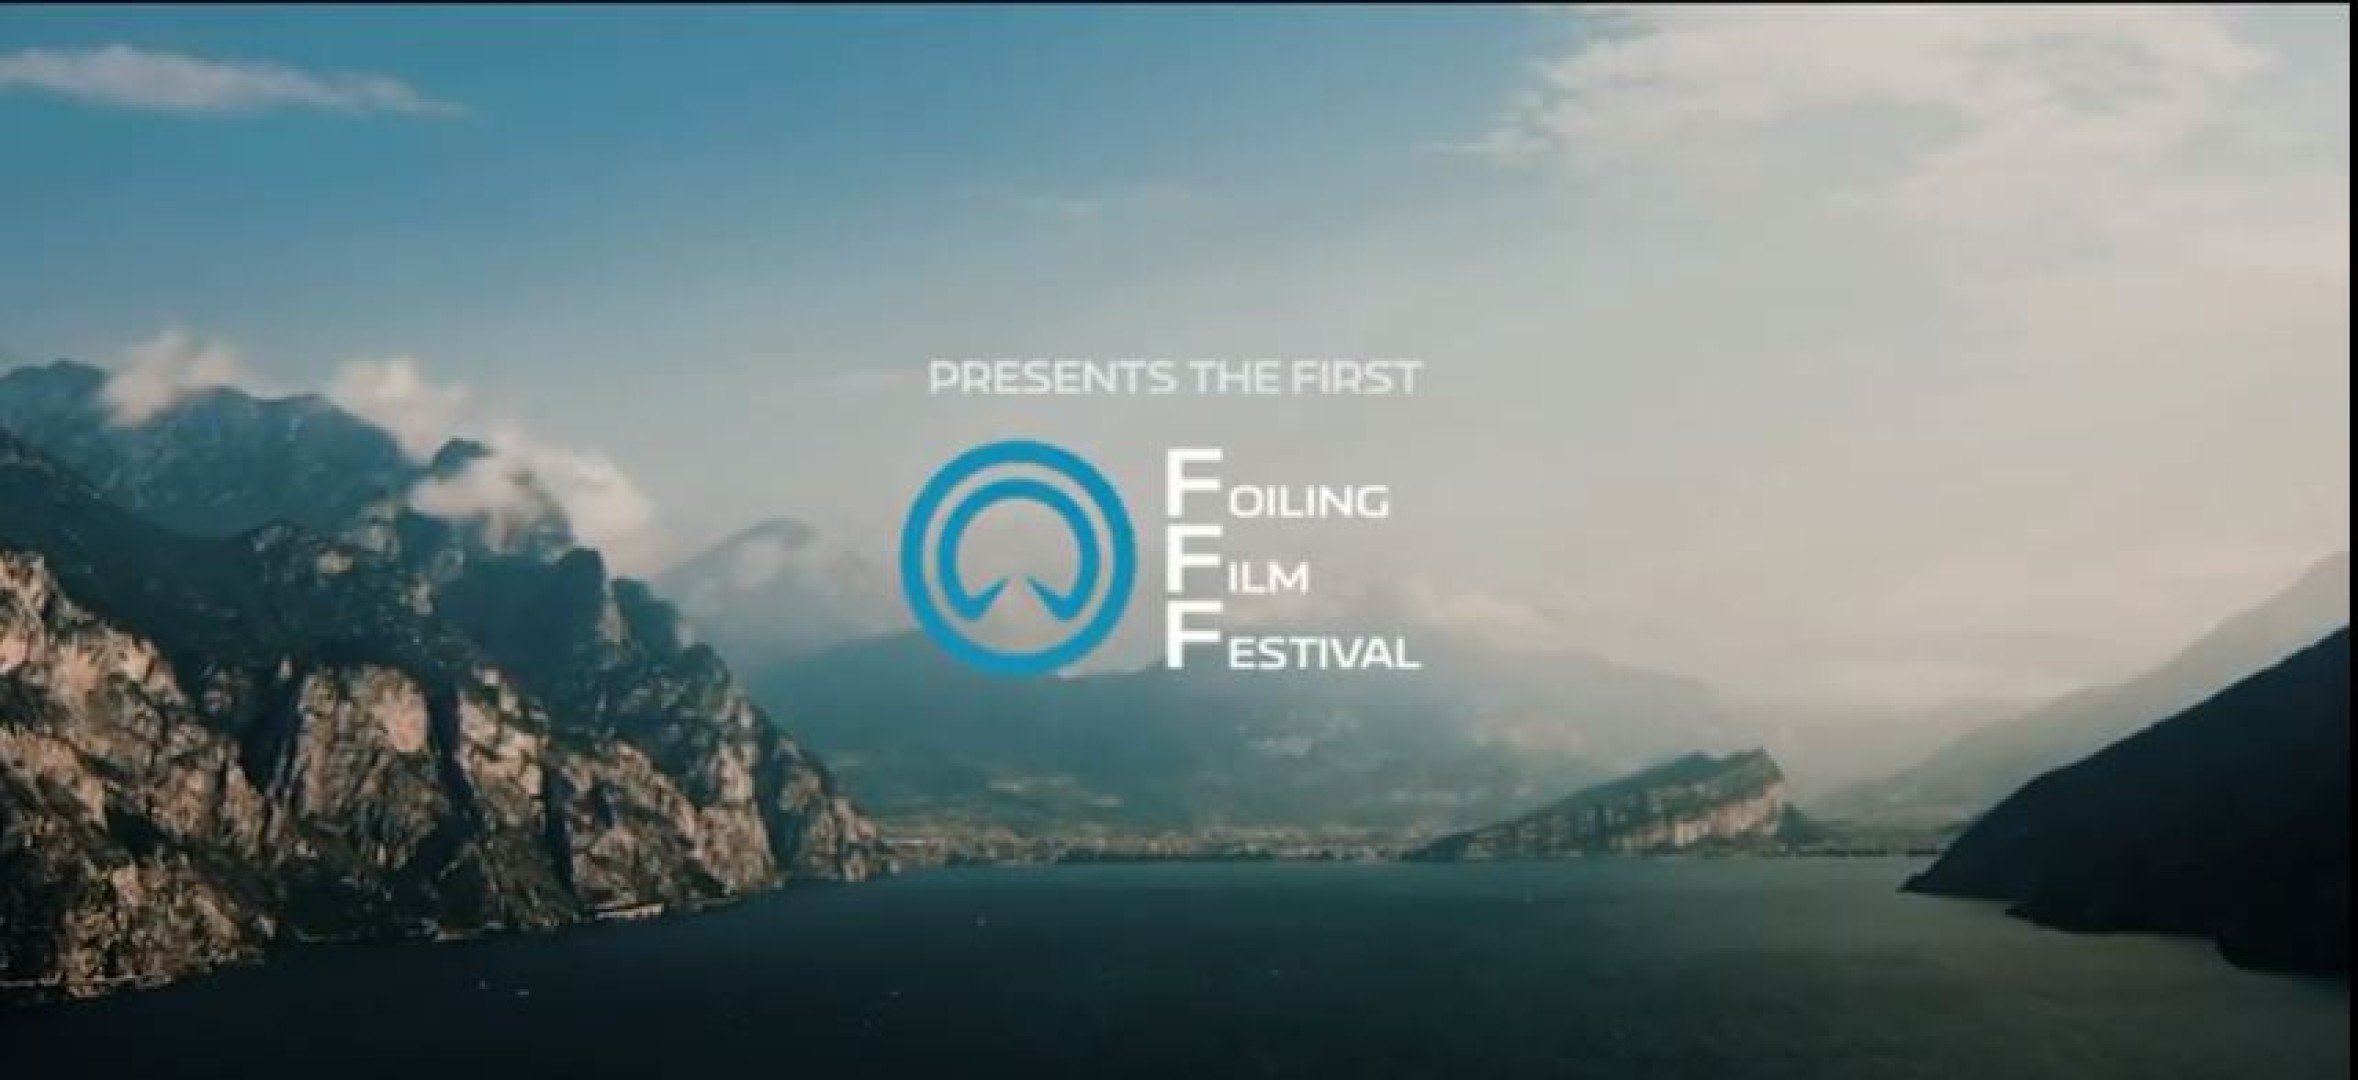 Foiling Week launches the first Film Festival all about Foiling